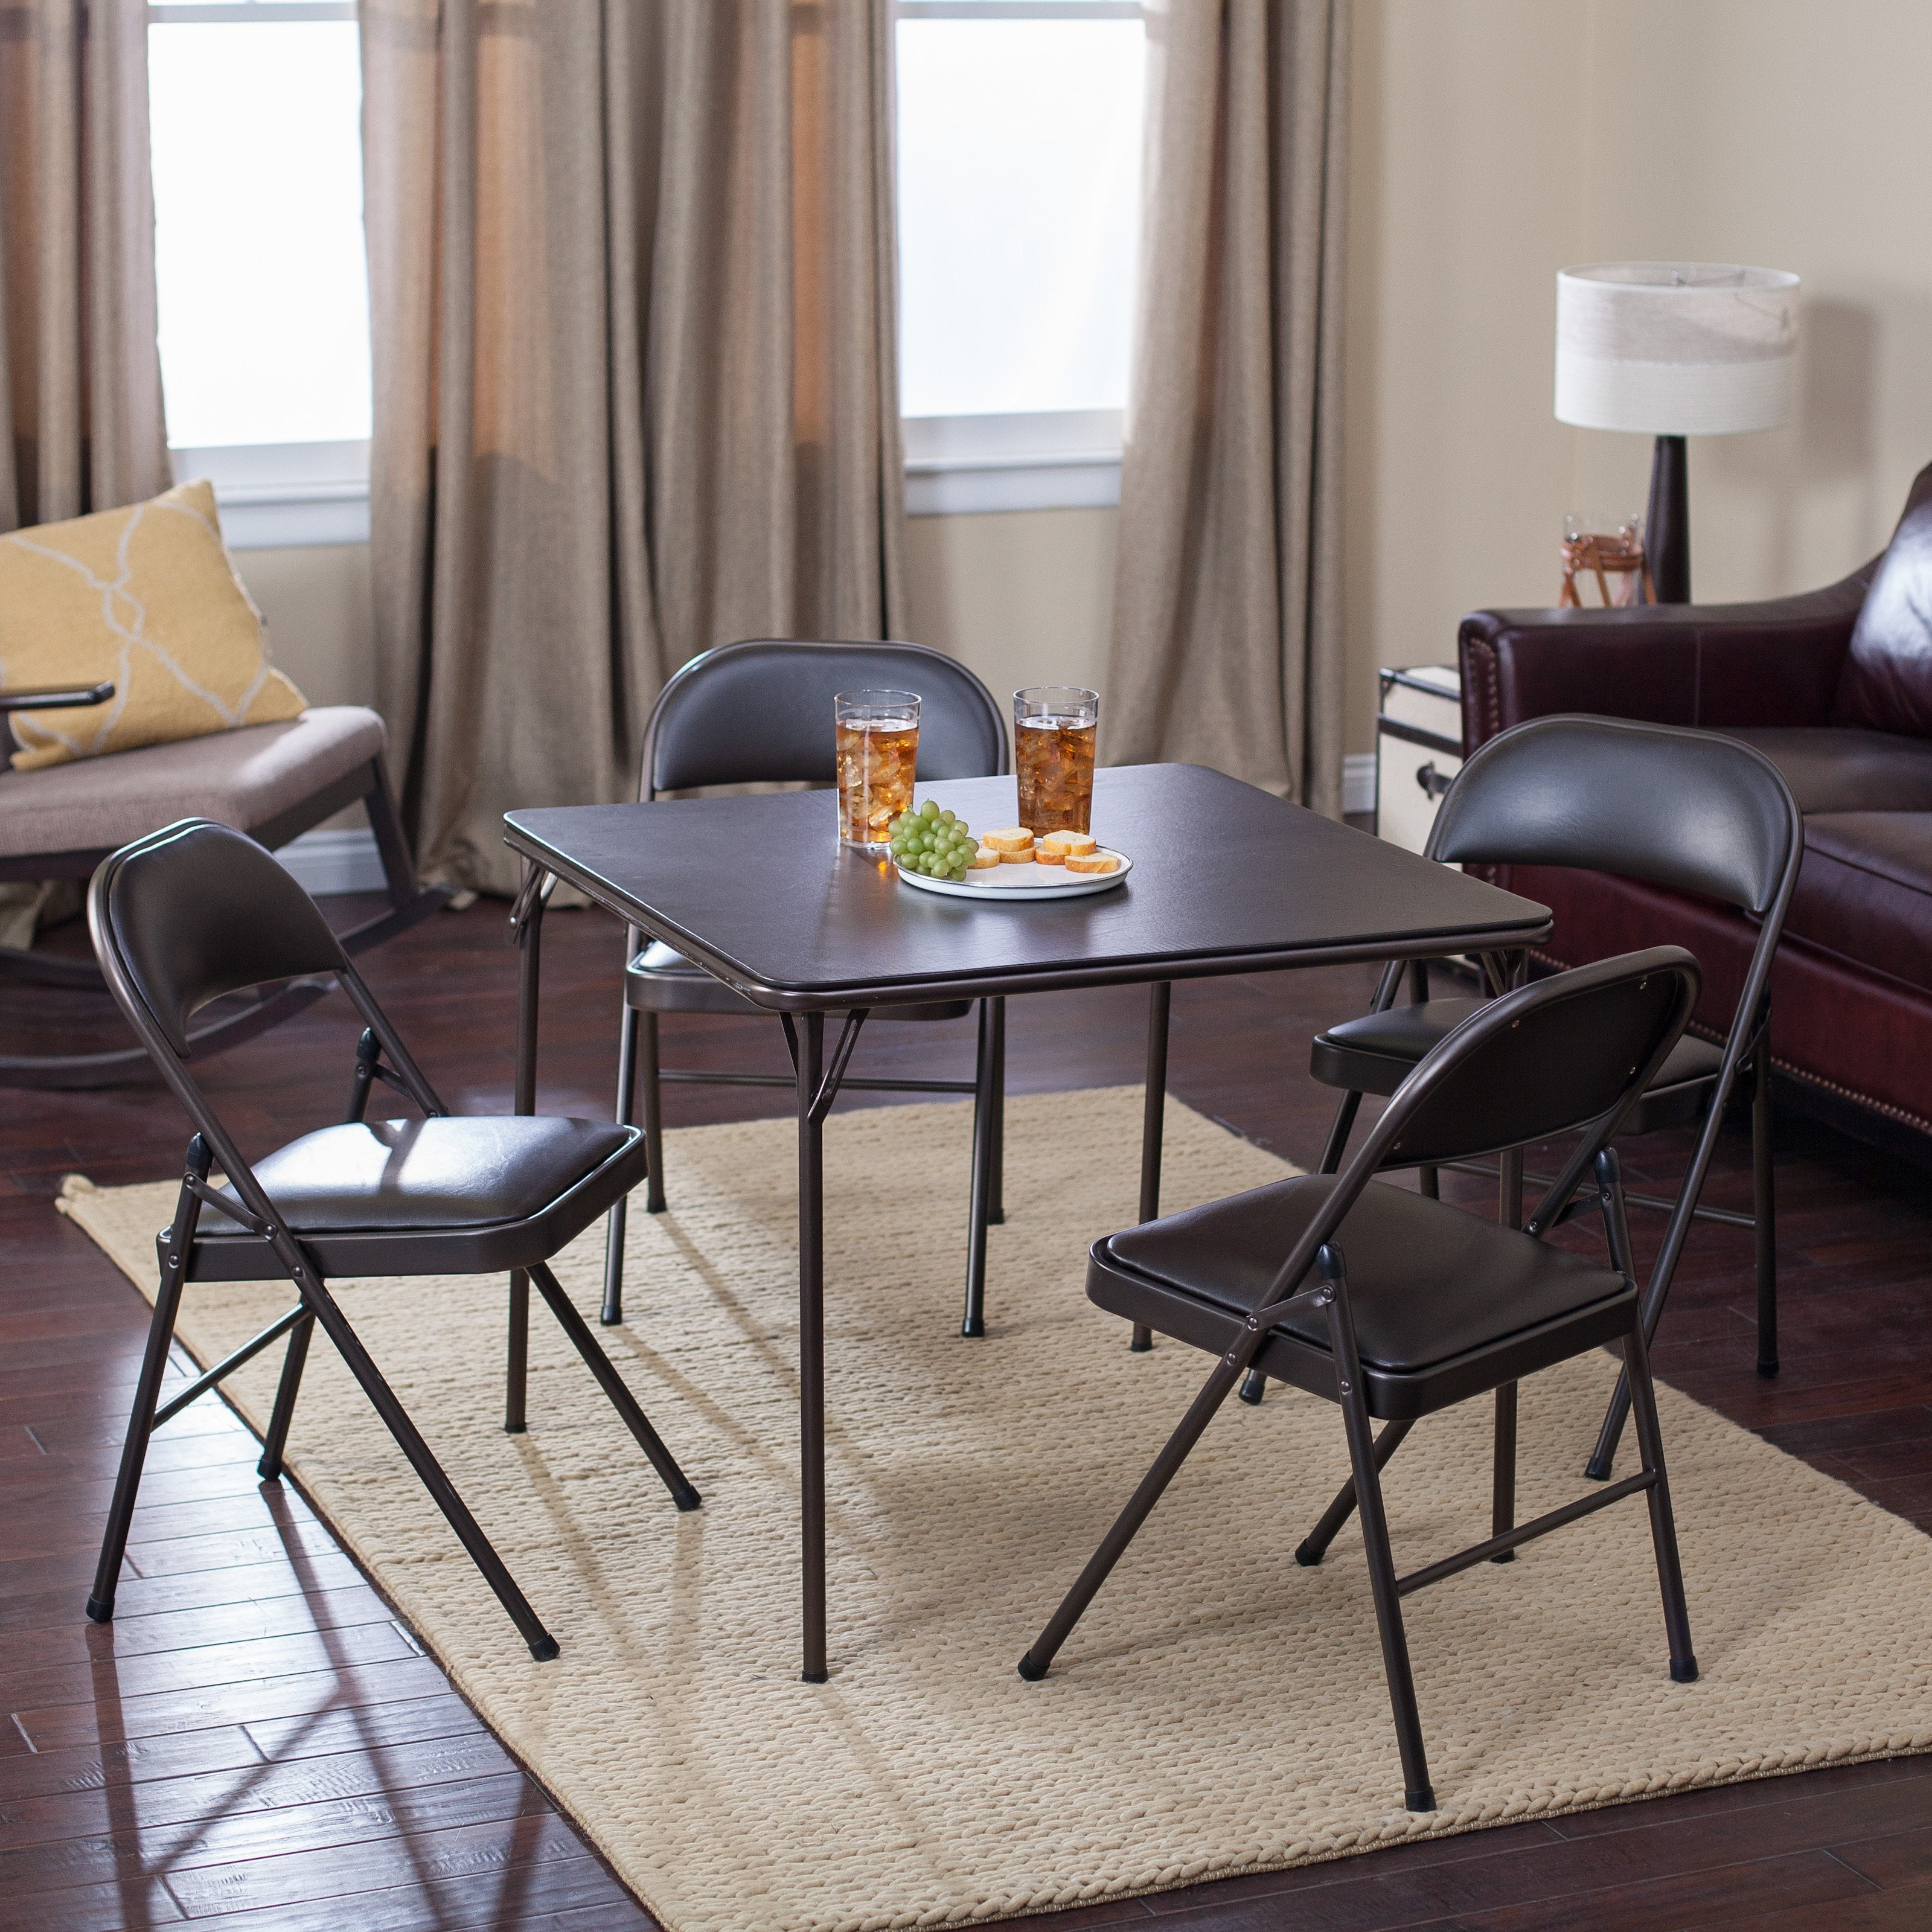 5 Piece Table And Chair Set In Deep Brown Walmart with Stylish as well as Lovely 5 piece card table and chair set black pertaining to House